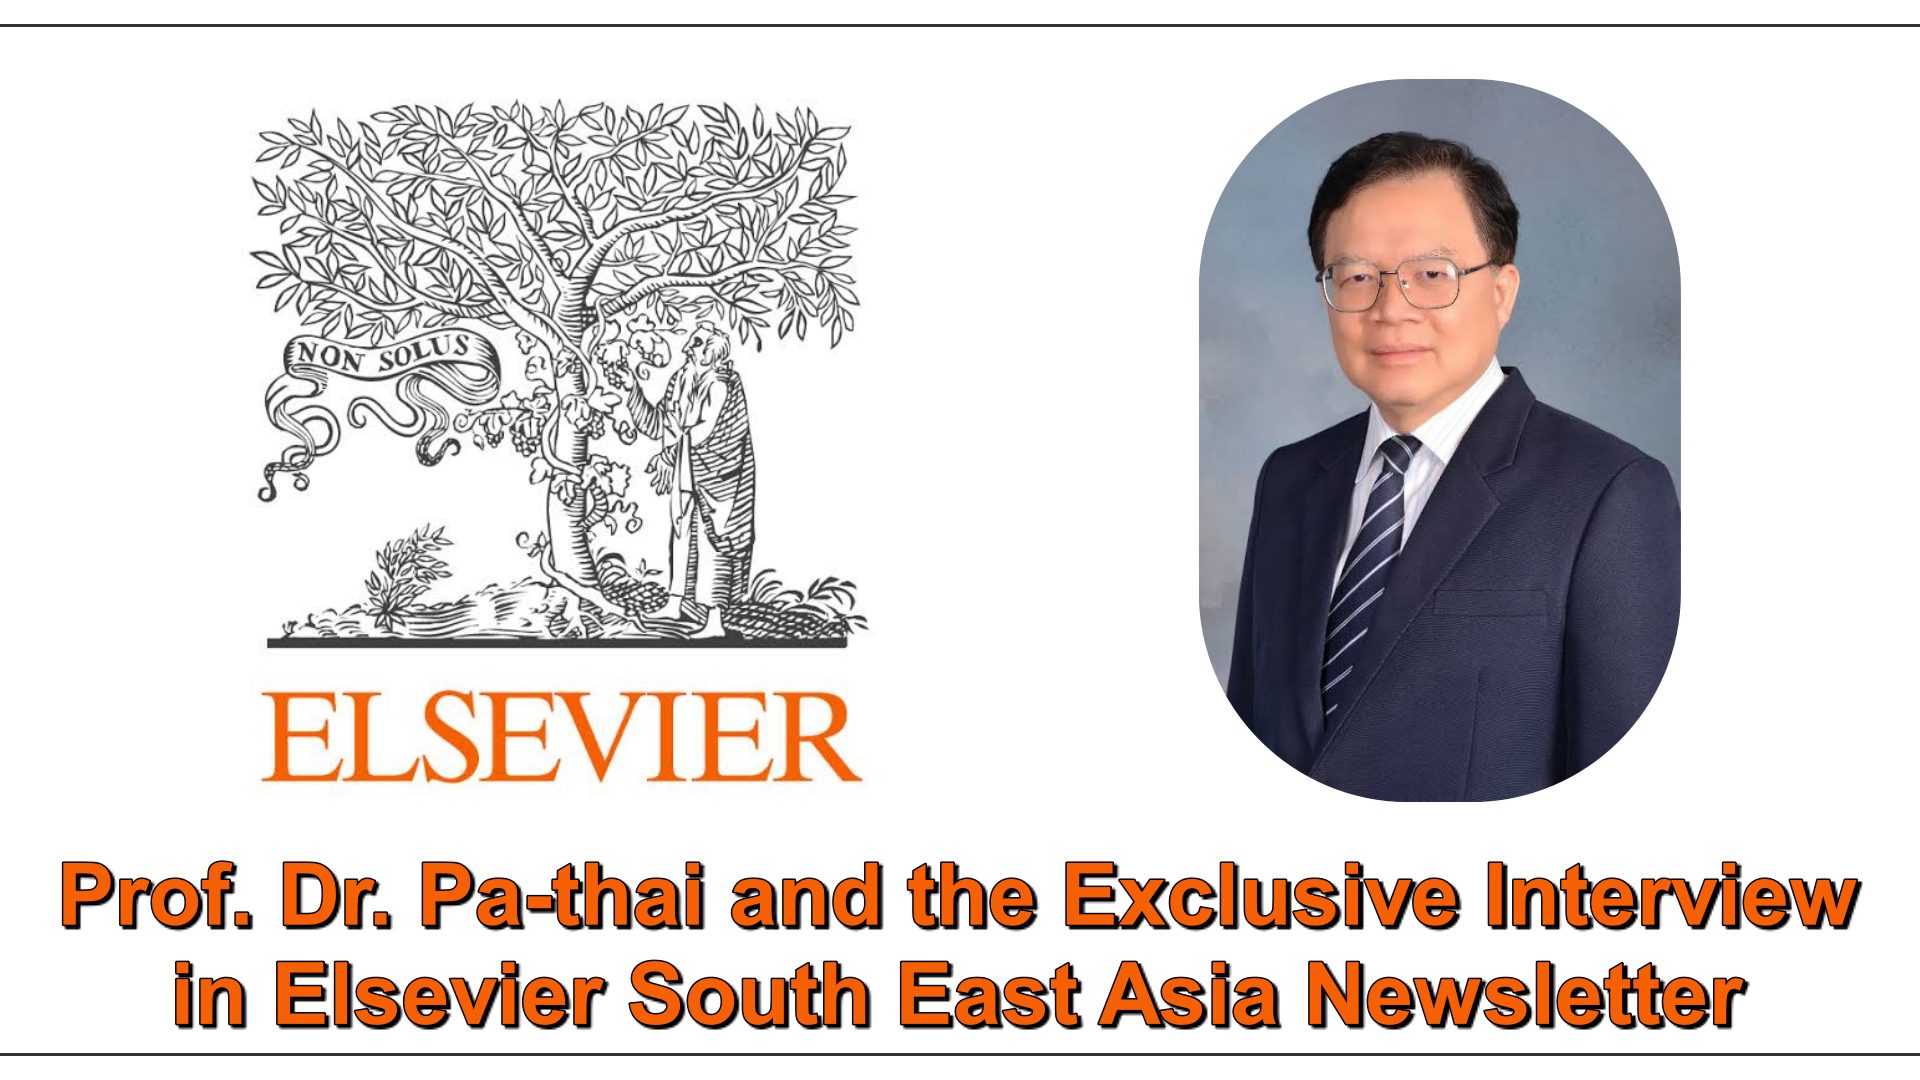 Prof.Dr. Pa-thai and the Exclusive Interview in Elsevier South East Asia Newsletter